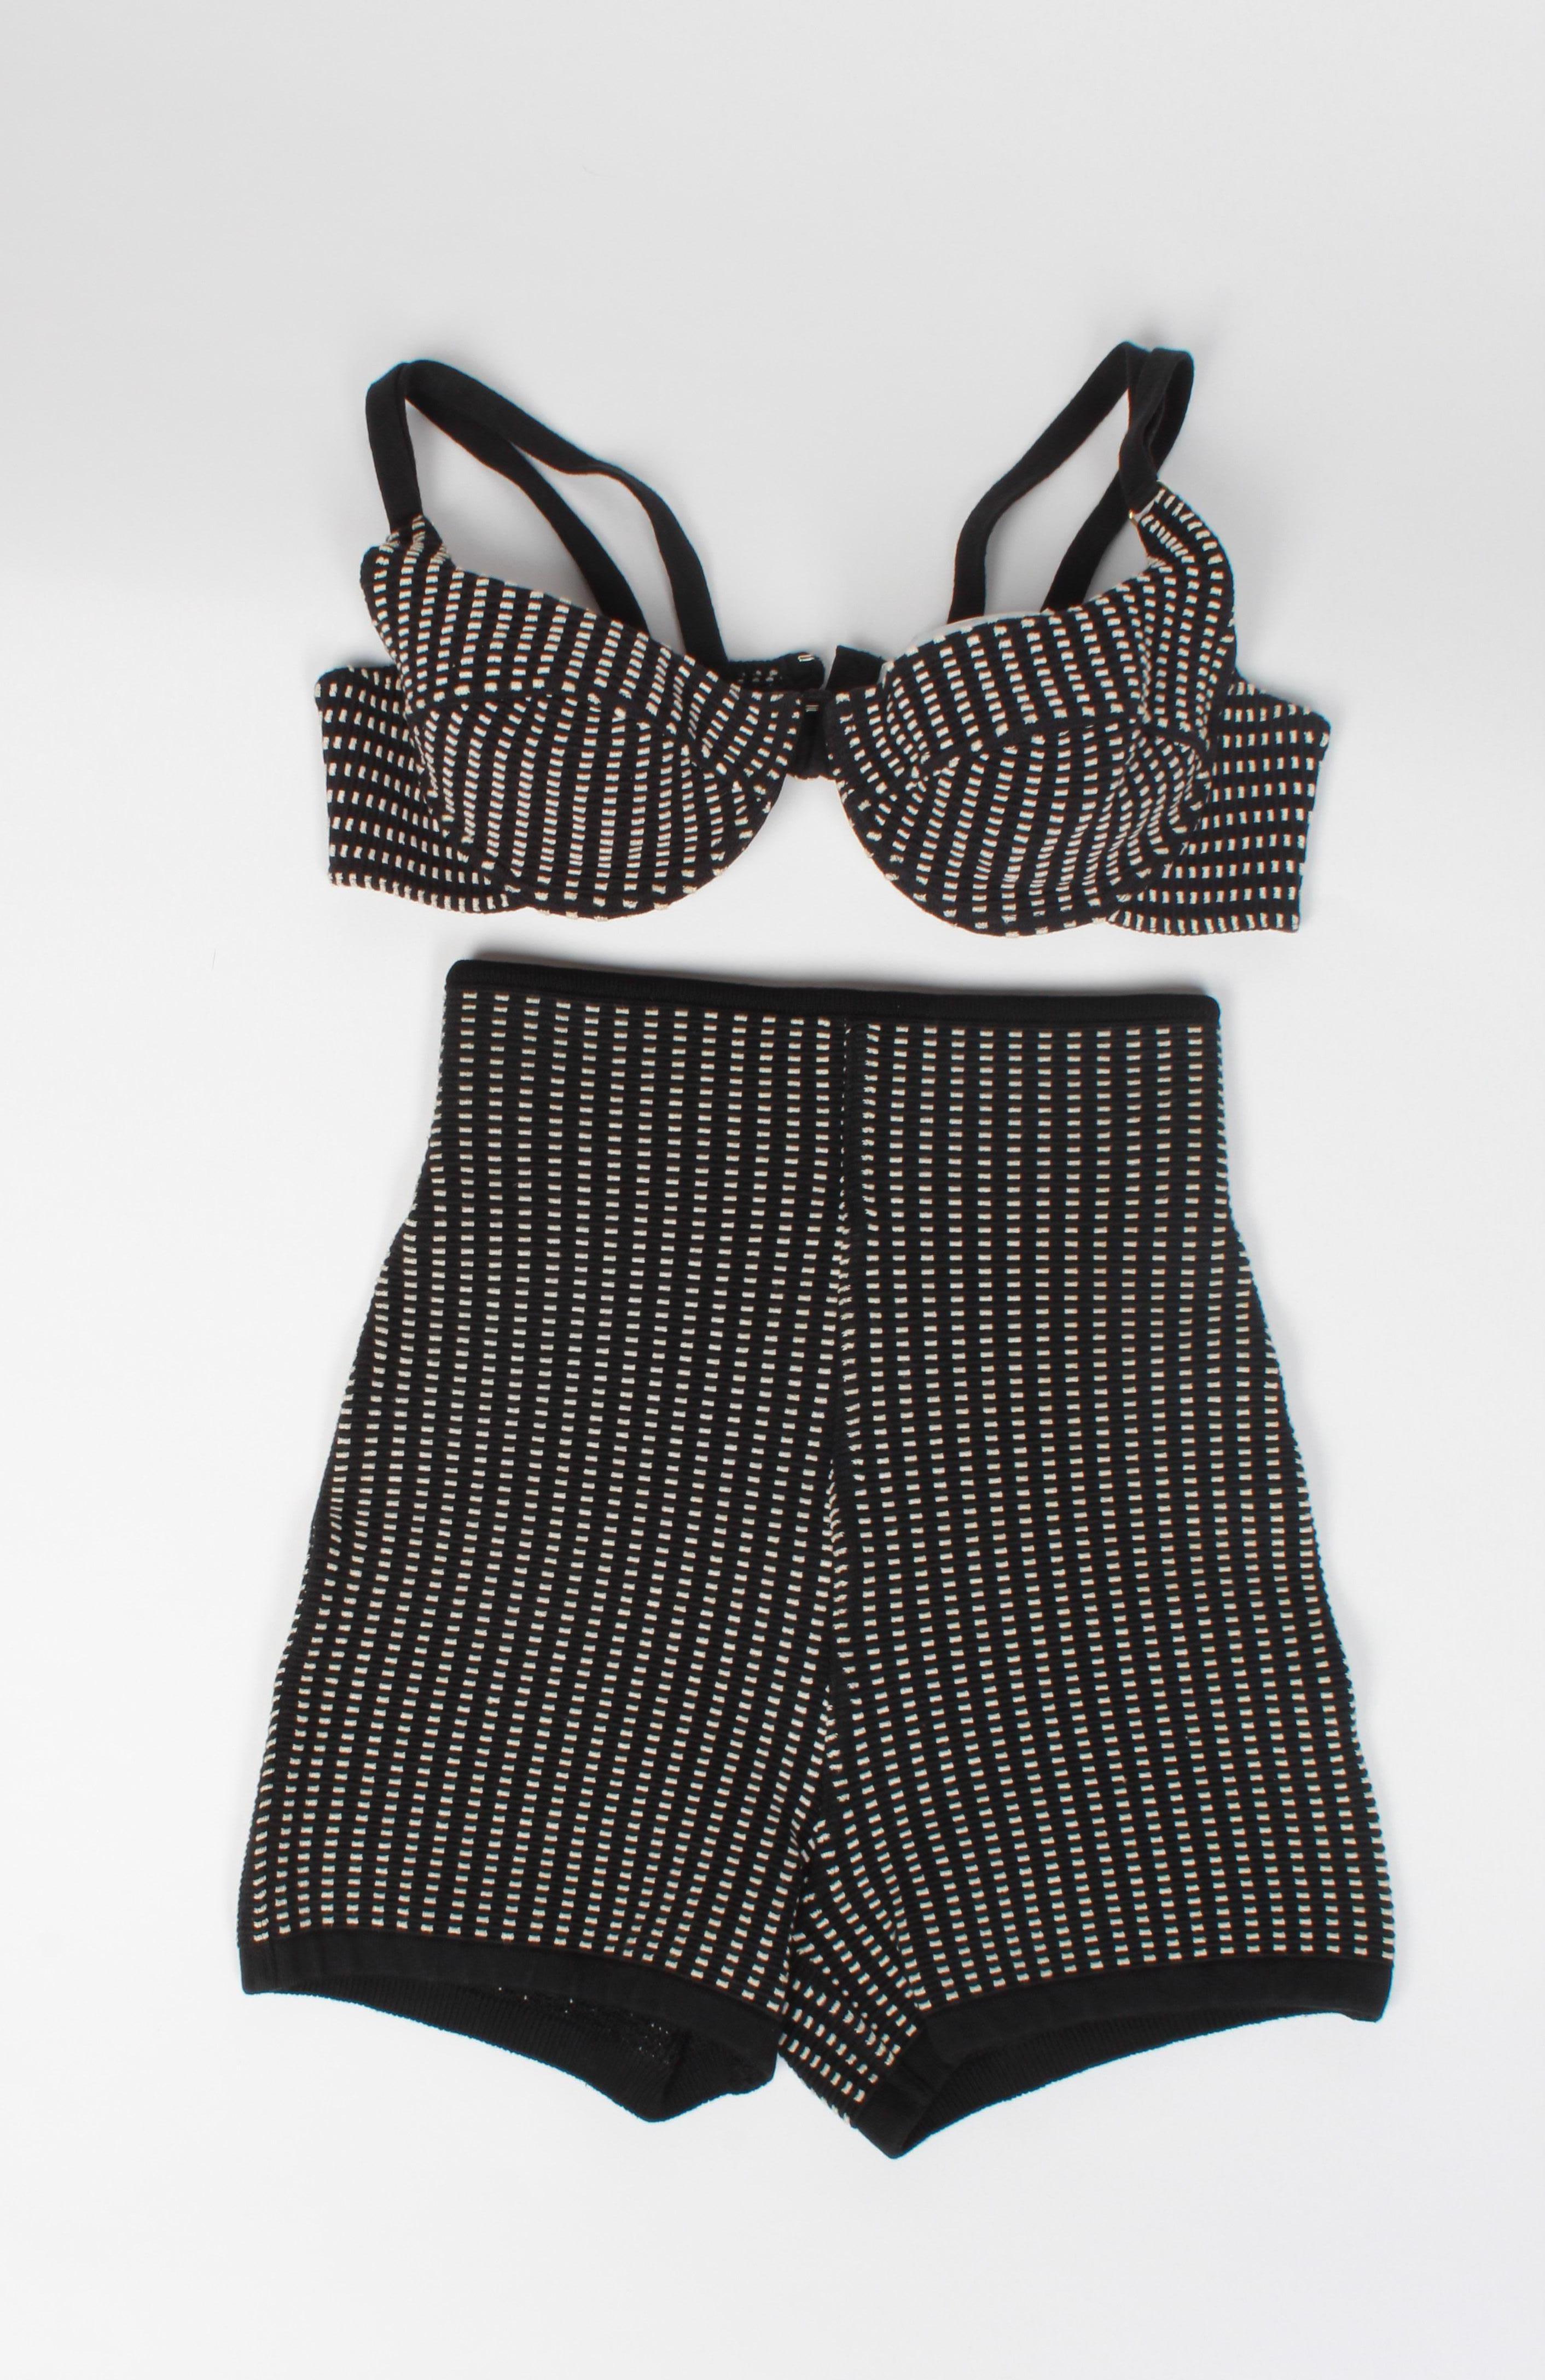 Iconic 1990's Alaia 2 Piece Swimsuit in black and white. 
Underwire cup bikini top and high waisted bottom. Very good vintage condition.
XS Made in Italy. Measurements are with garment relaxed and un-stretched.
